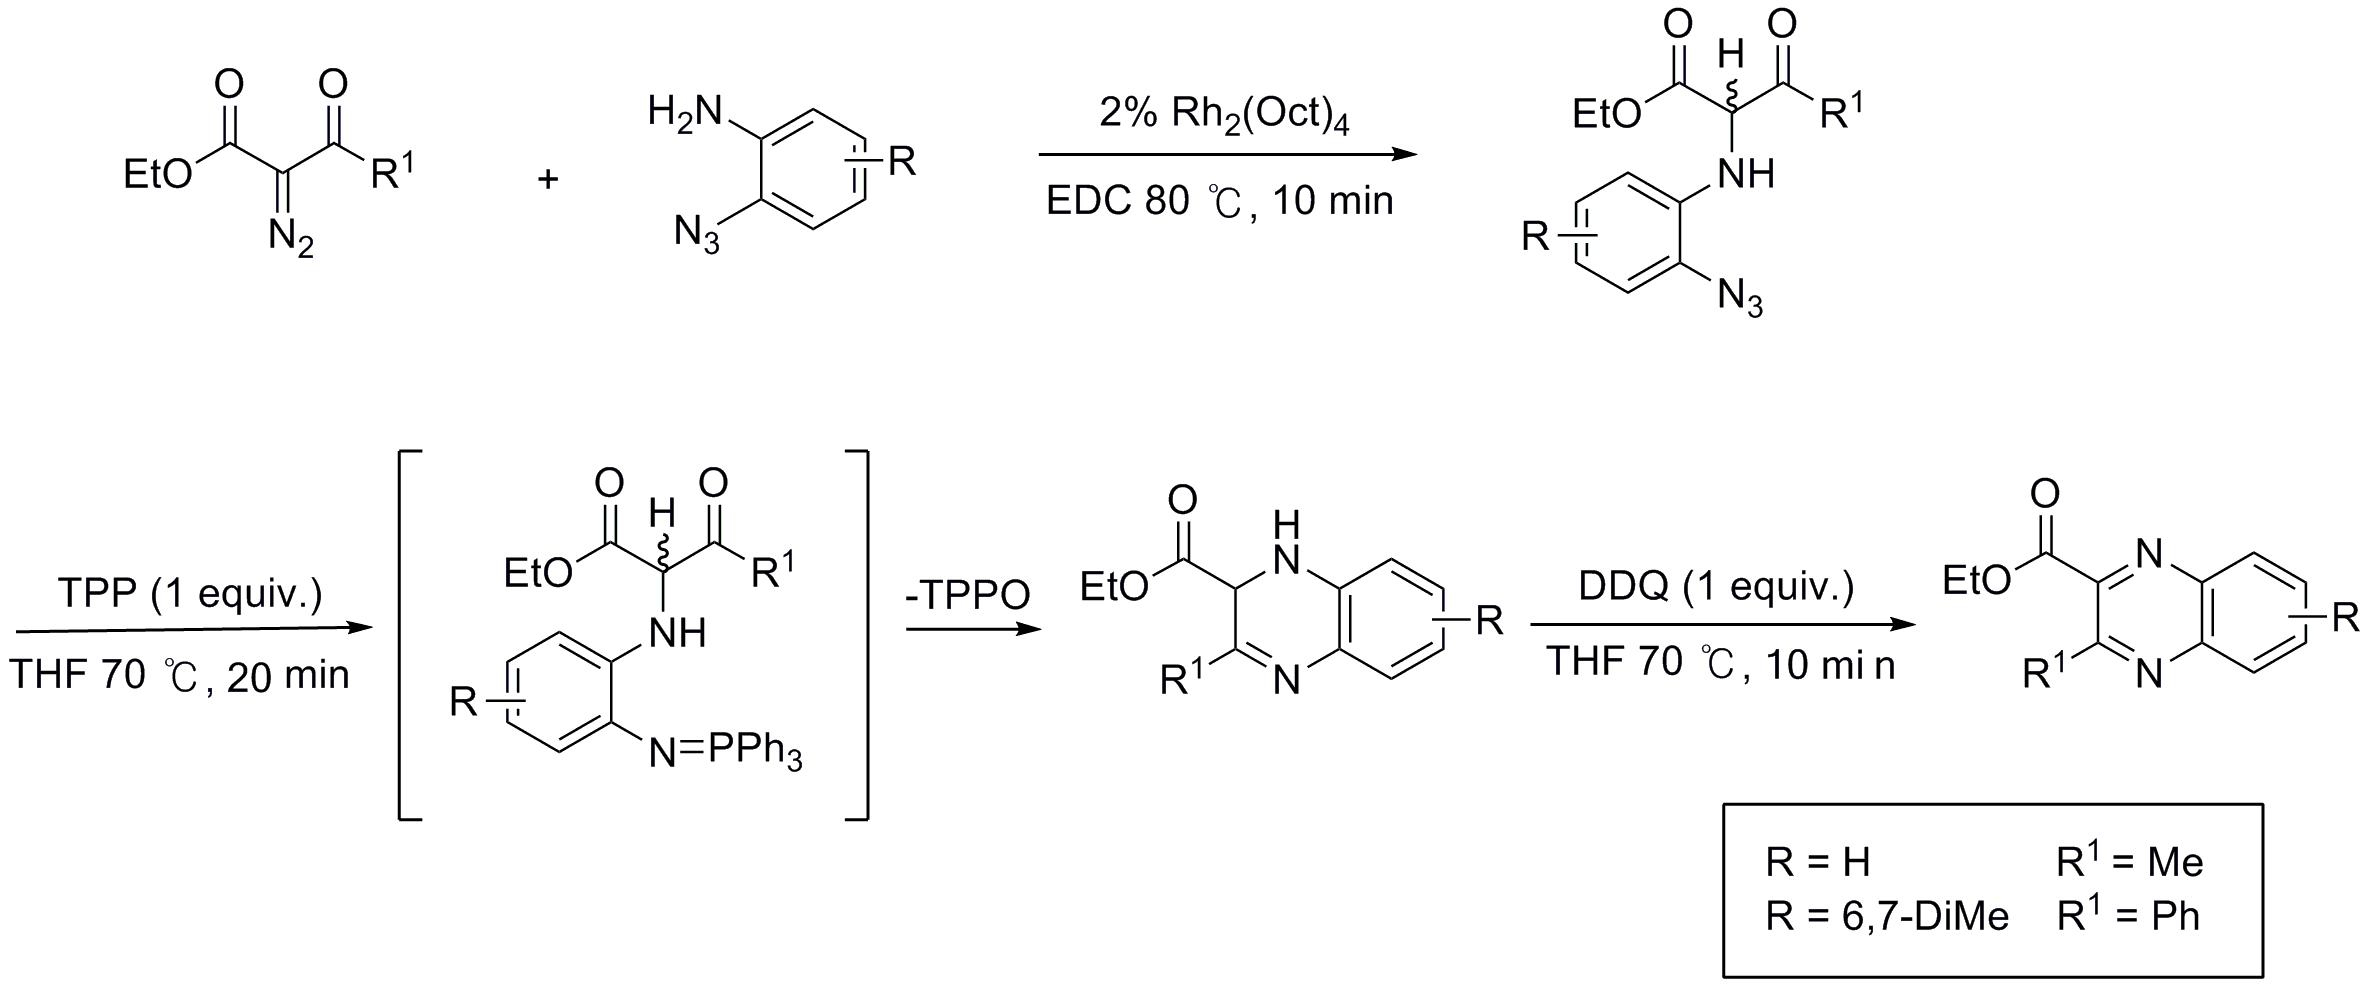 Solution-phase synthesis of quinoxaline from diazocabonyl compounds and o-azidoalines